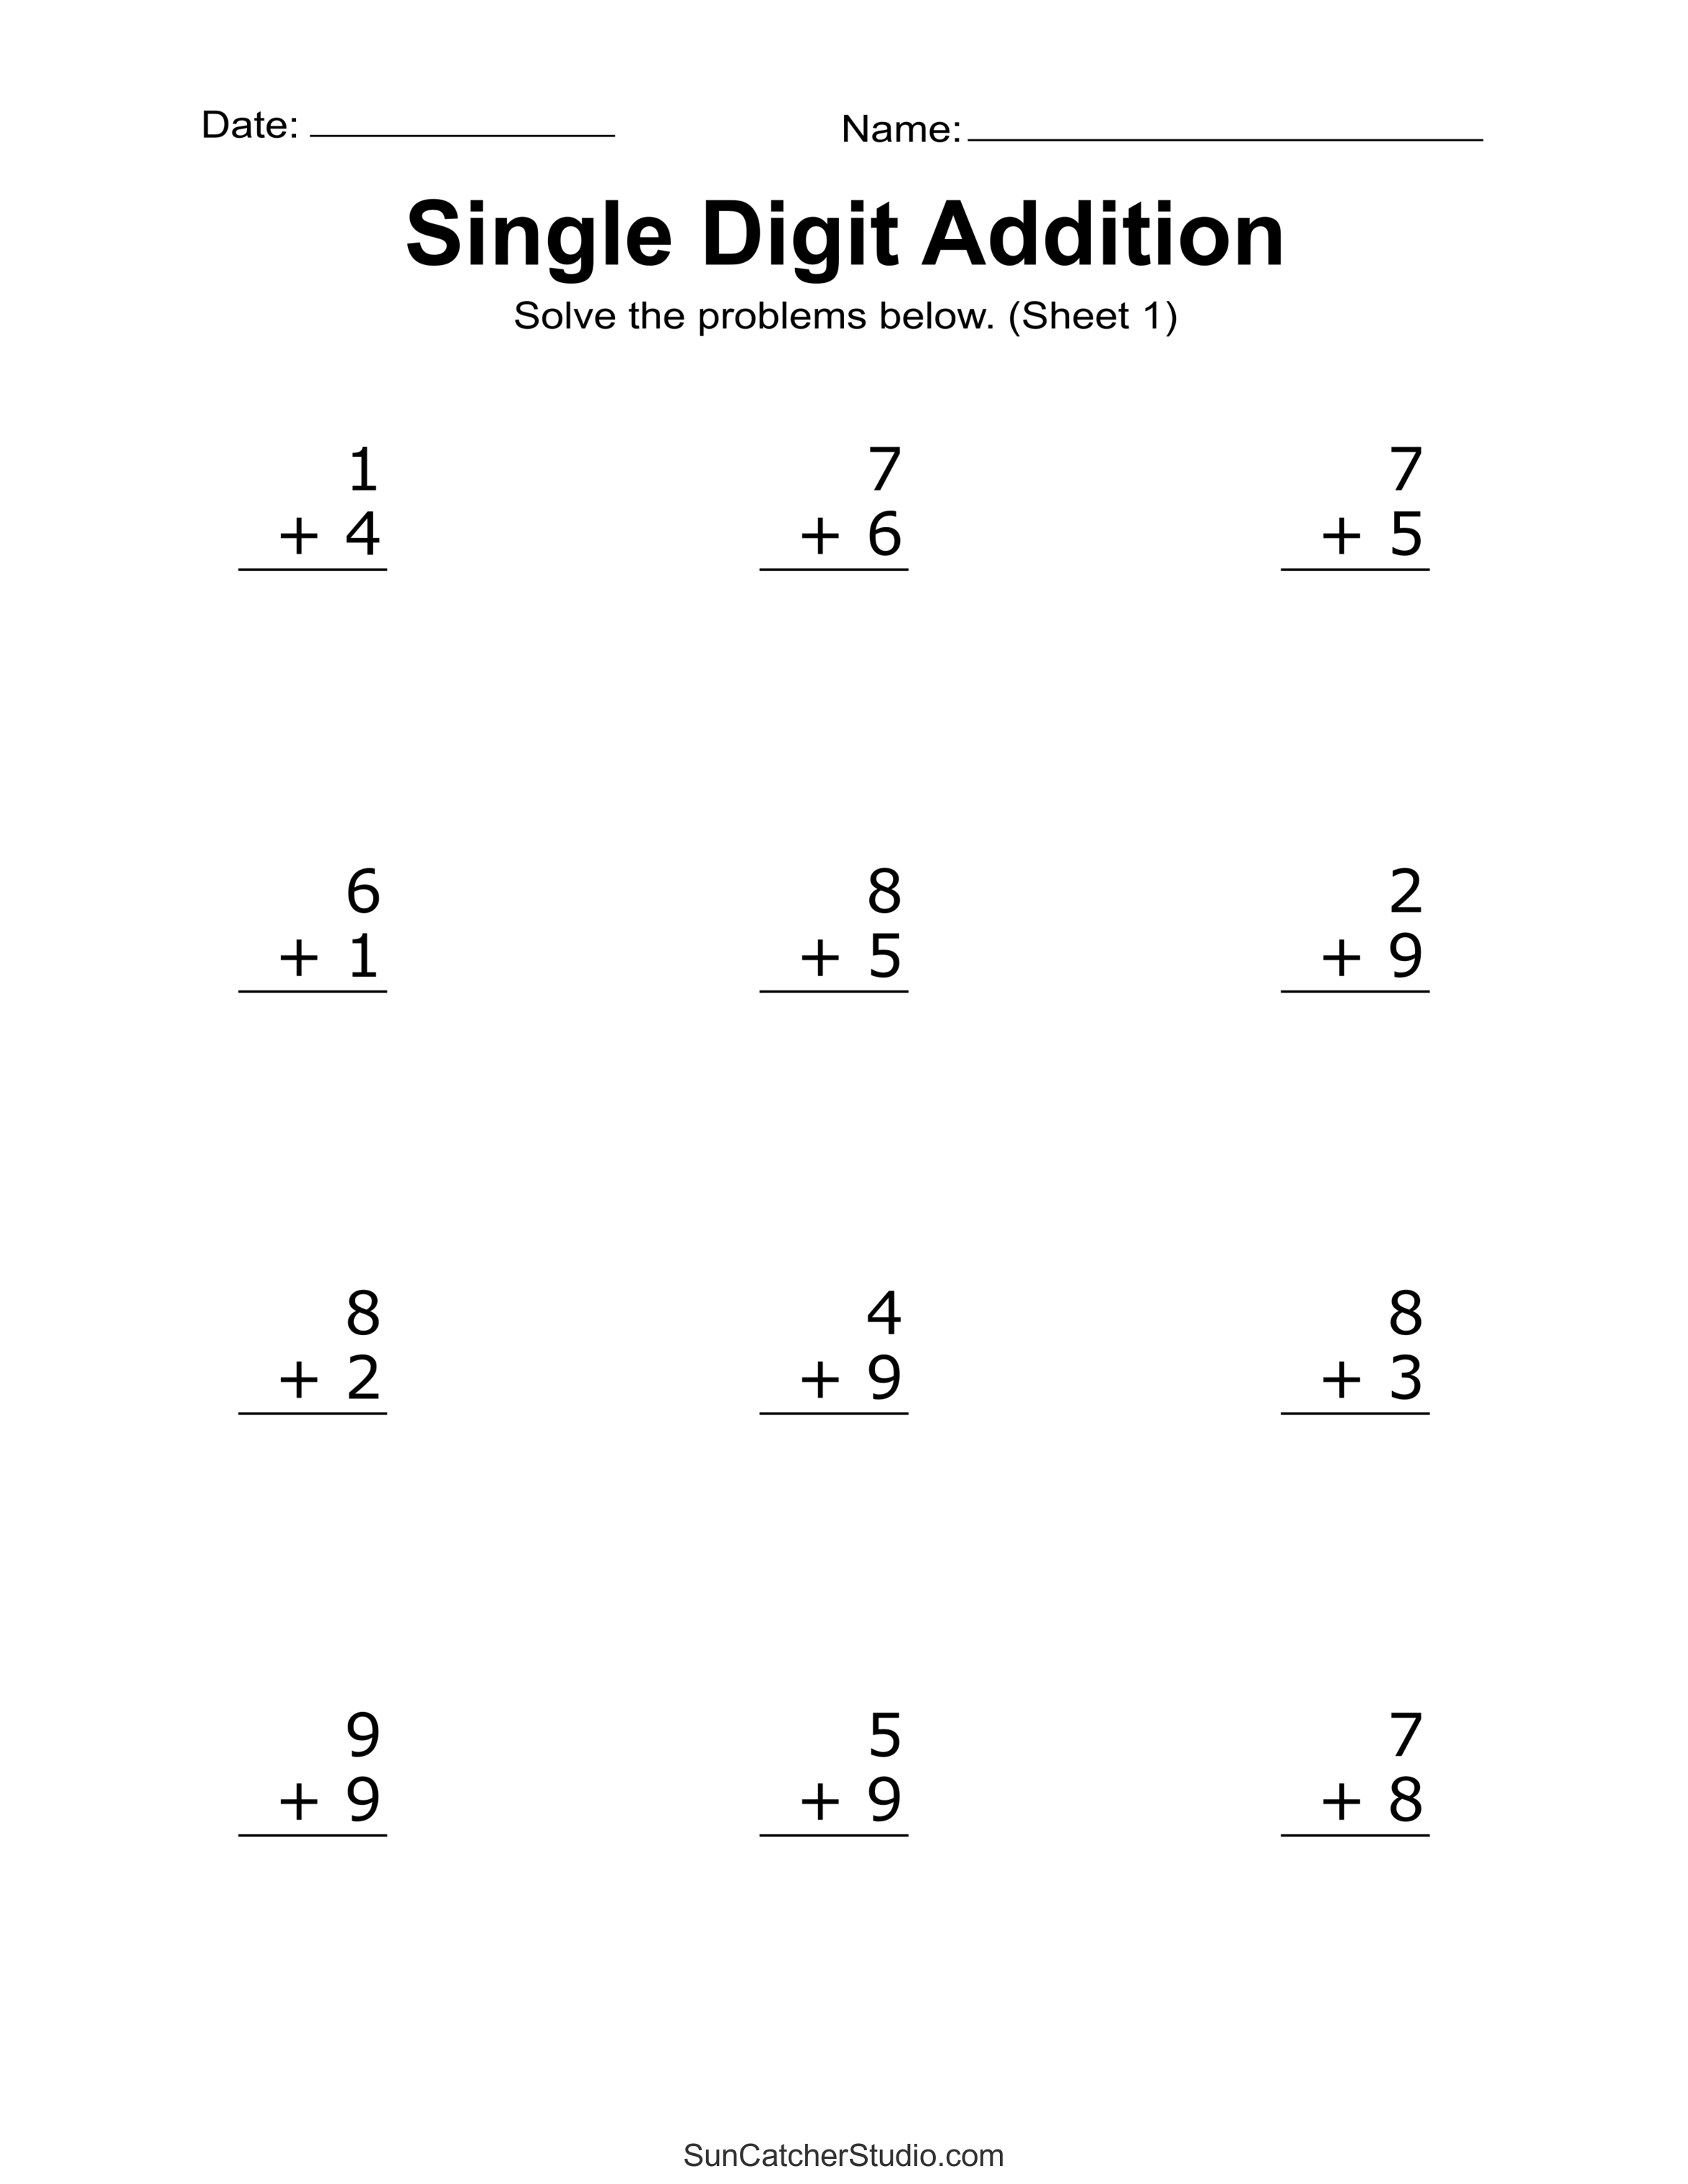 Addition Worksheets Free Printable Easy Math Problems DIY Projects Patterns Monograms Designs Templates